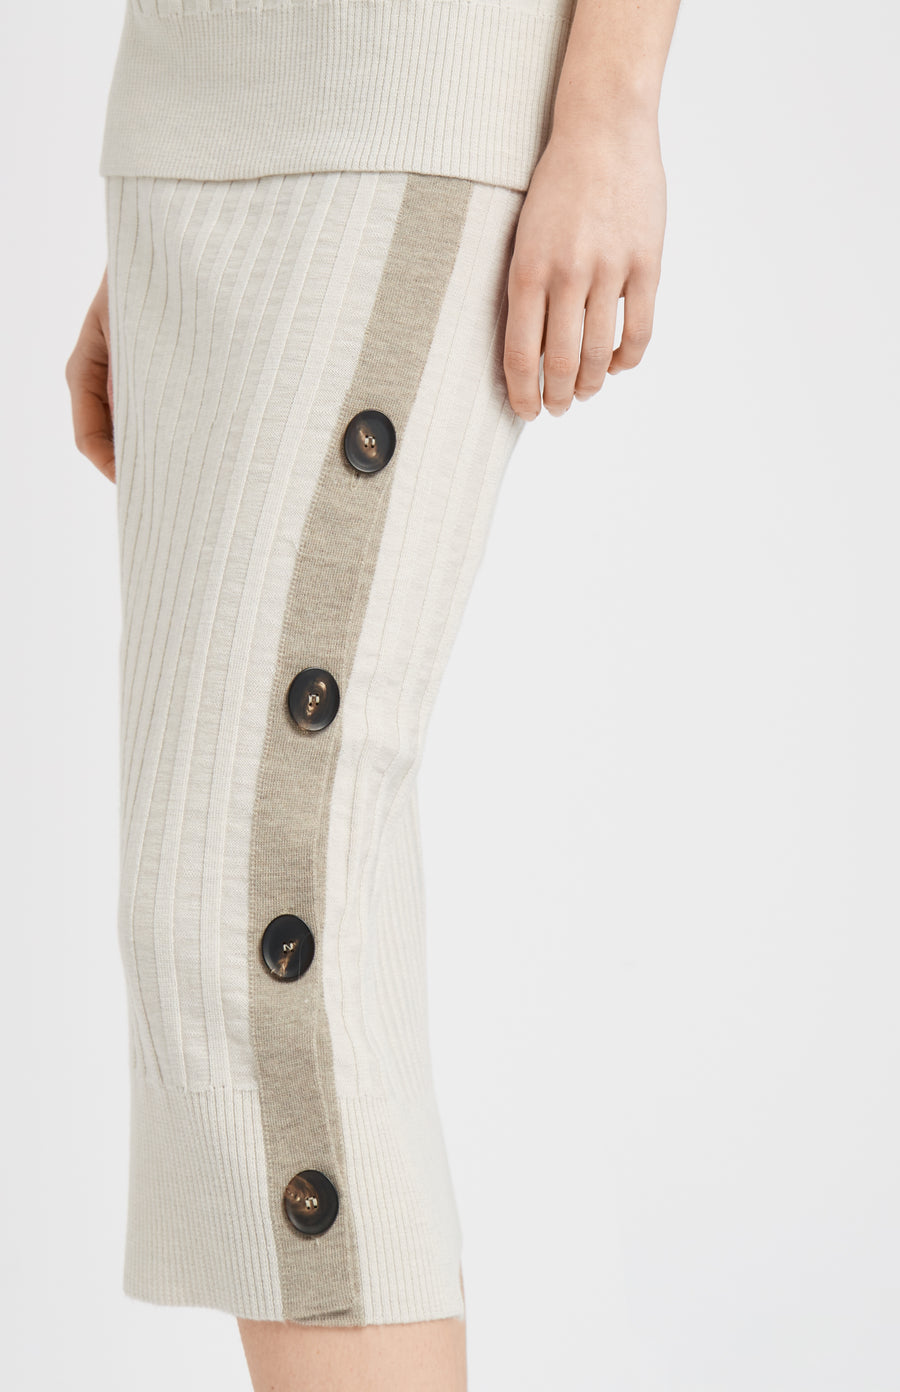 Pringle of Scotland Long Ribbed Merino Skirt in Natural showing button detail